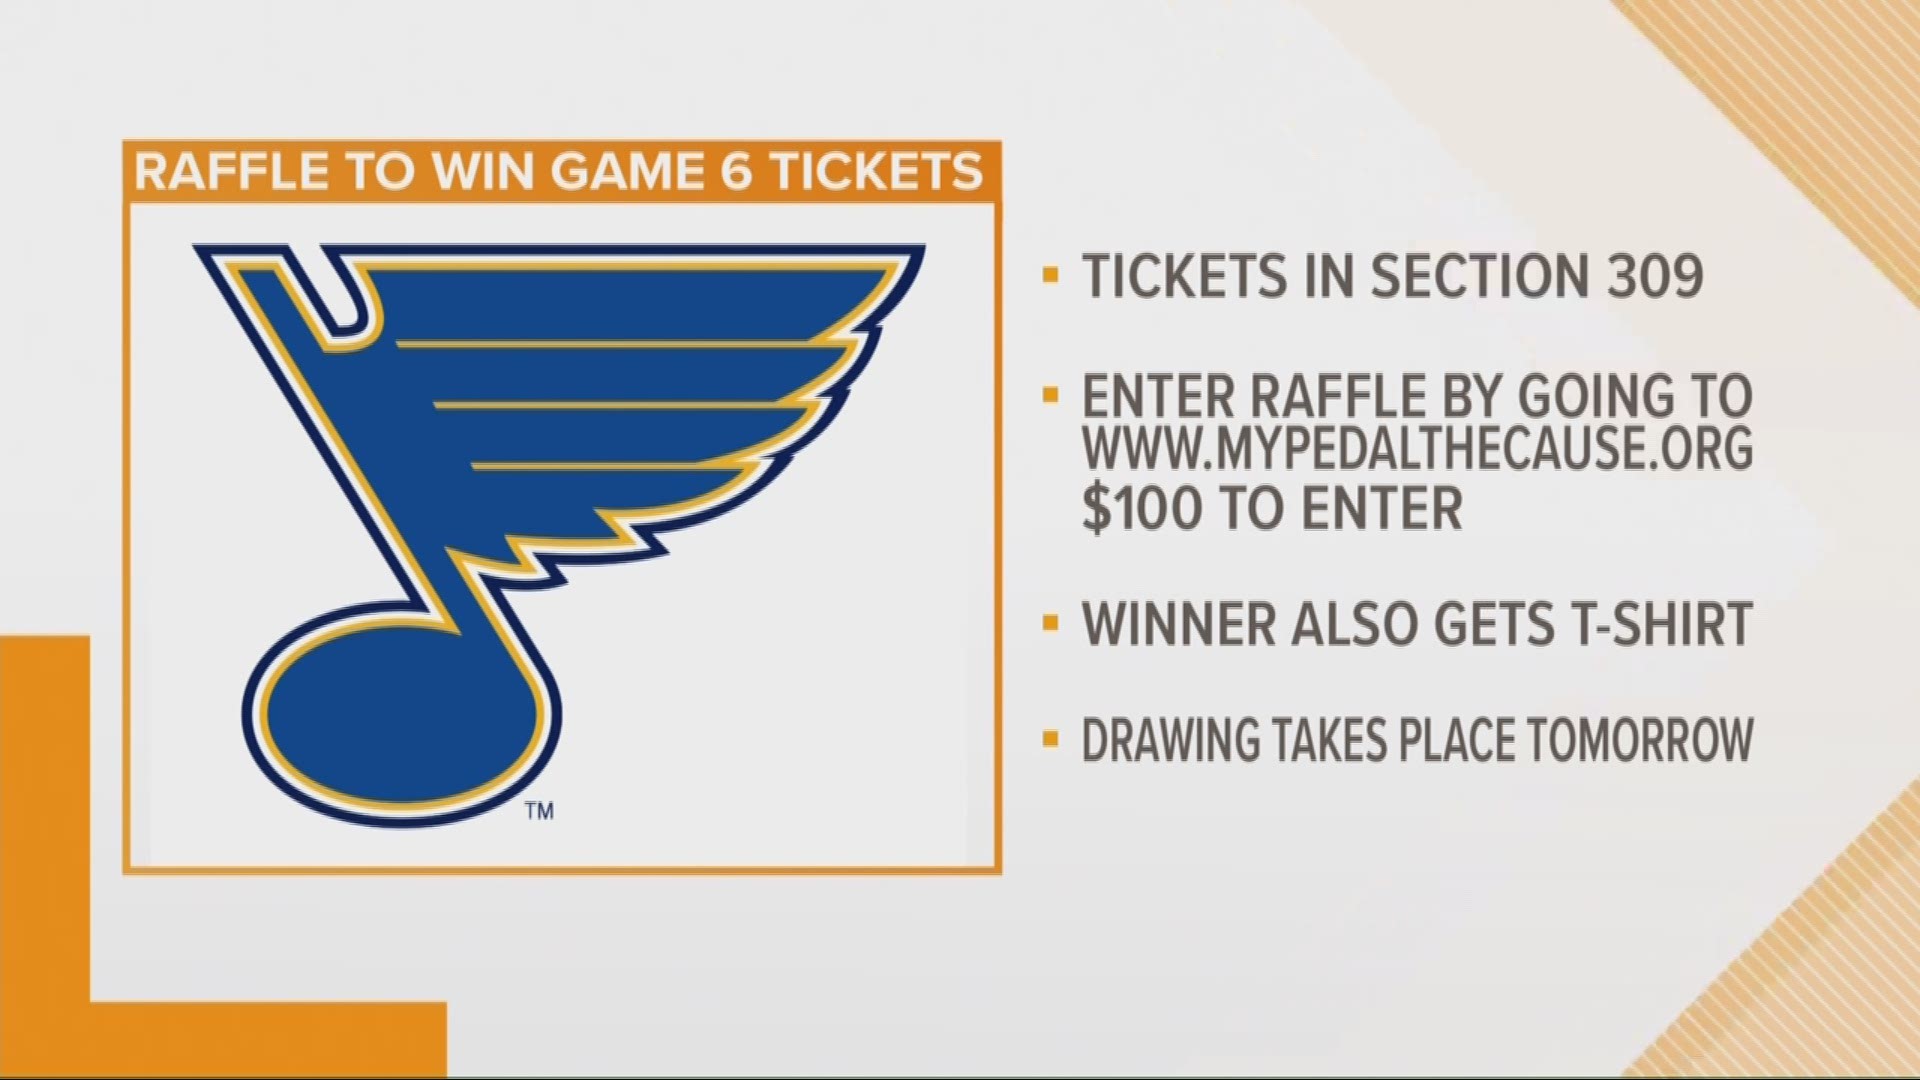 There's a way for you to get tickets to Game 6 and make a difference in the community. Ticket raffle will help raise money in the fight against cancer.